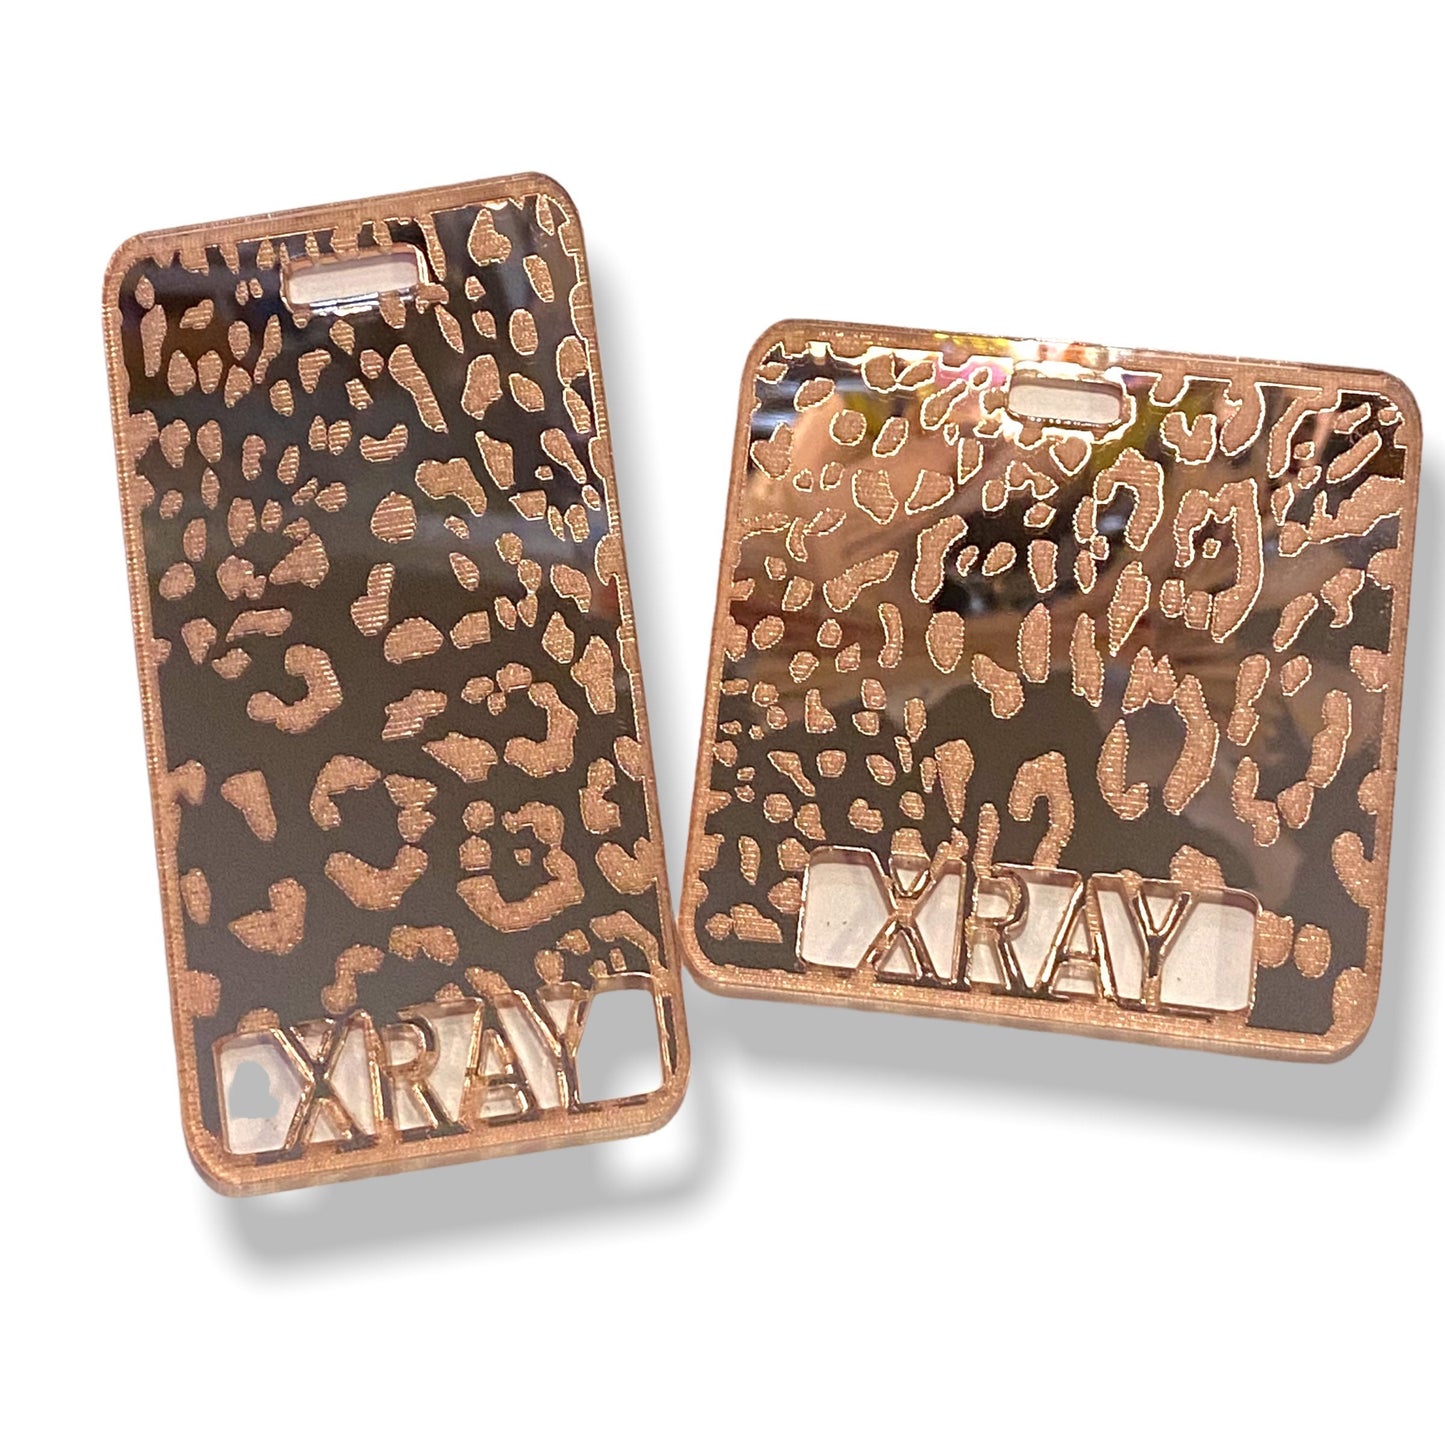 Rad Pad Leopard Rose Gold  for Holding Xray Markers